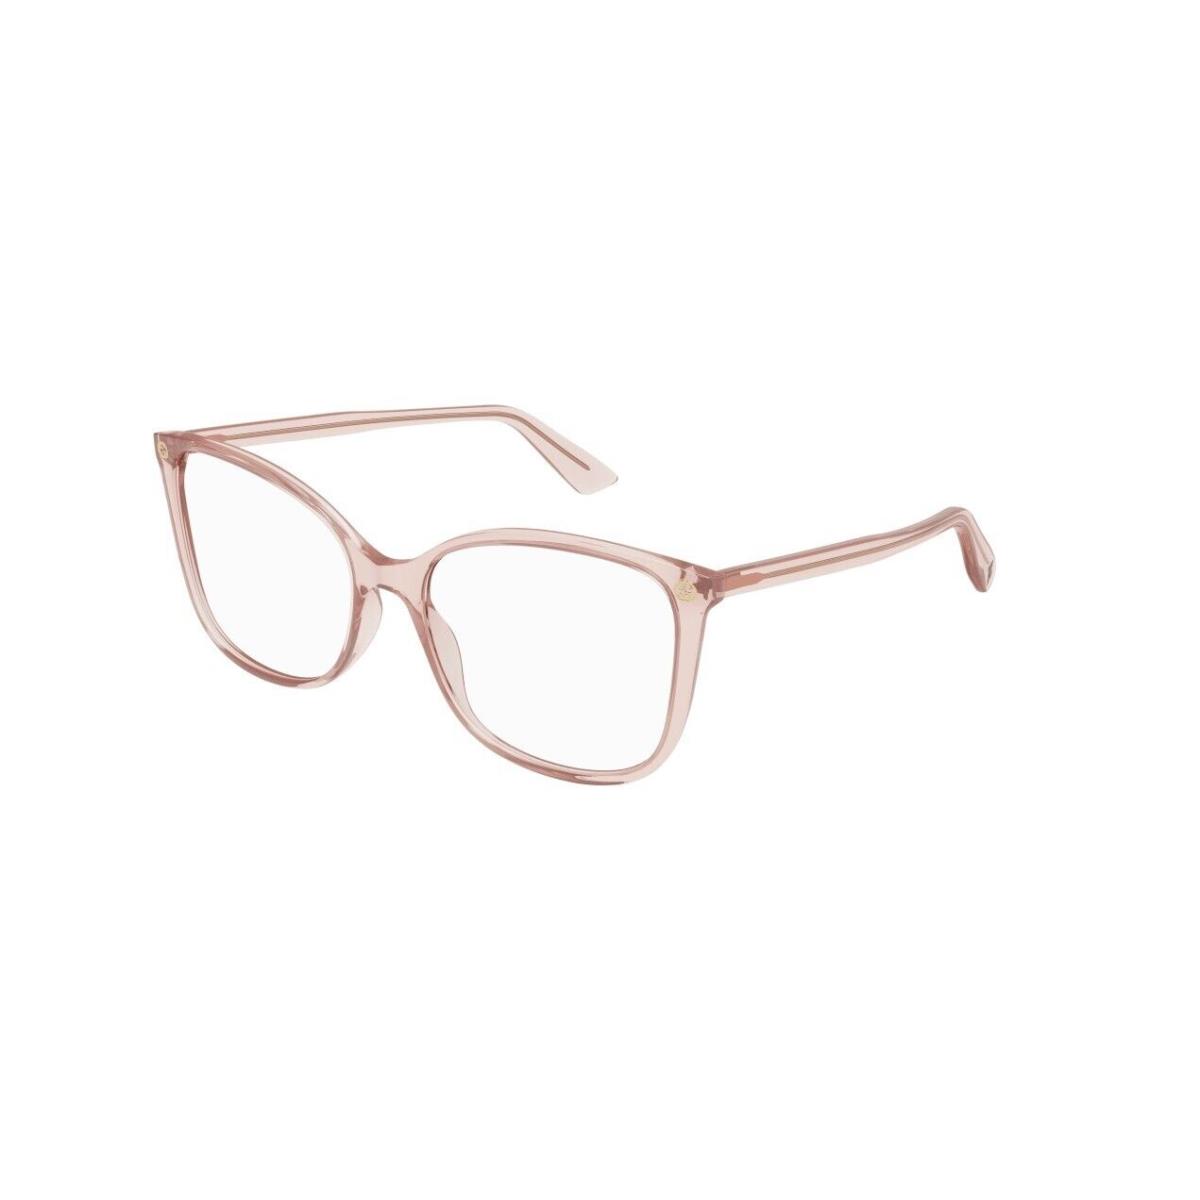 Gucci GG0026O 013 Soft Square Women`s Eyeglasses - Frame: Nude, Lens: Clear